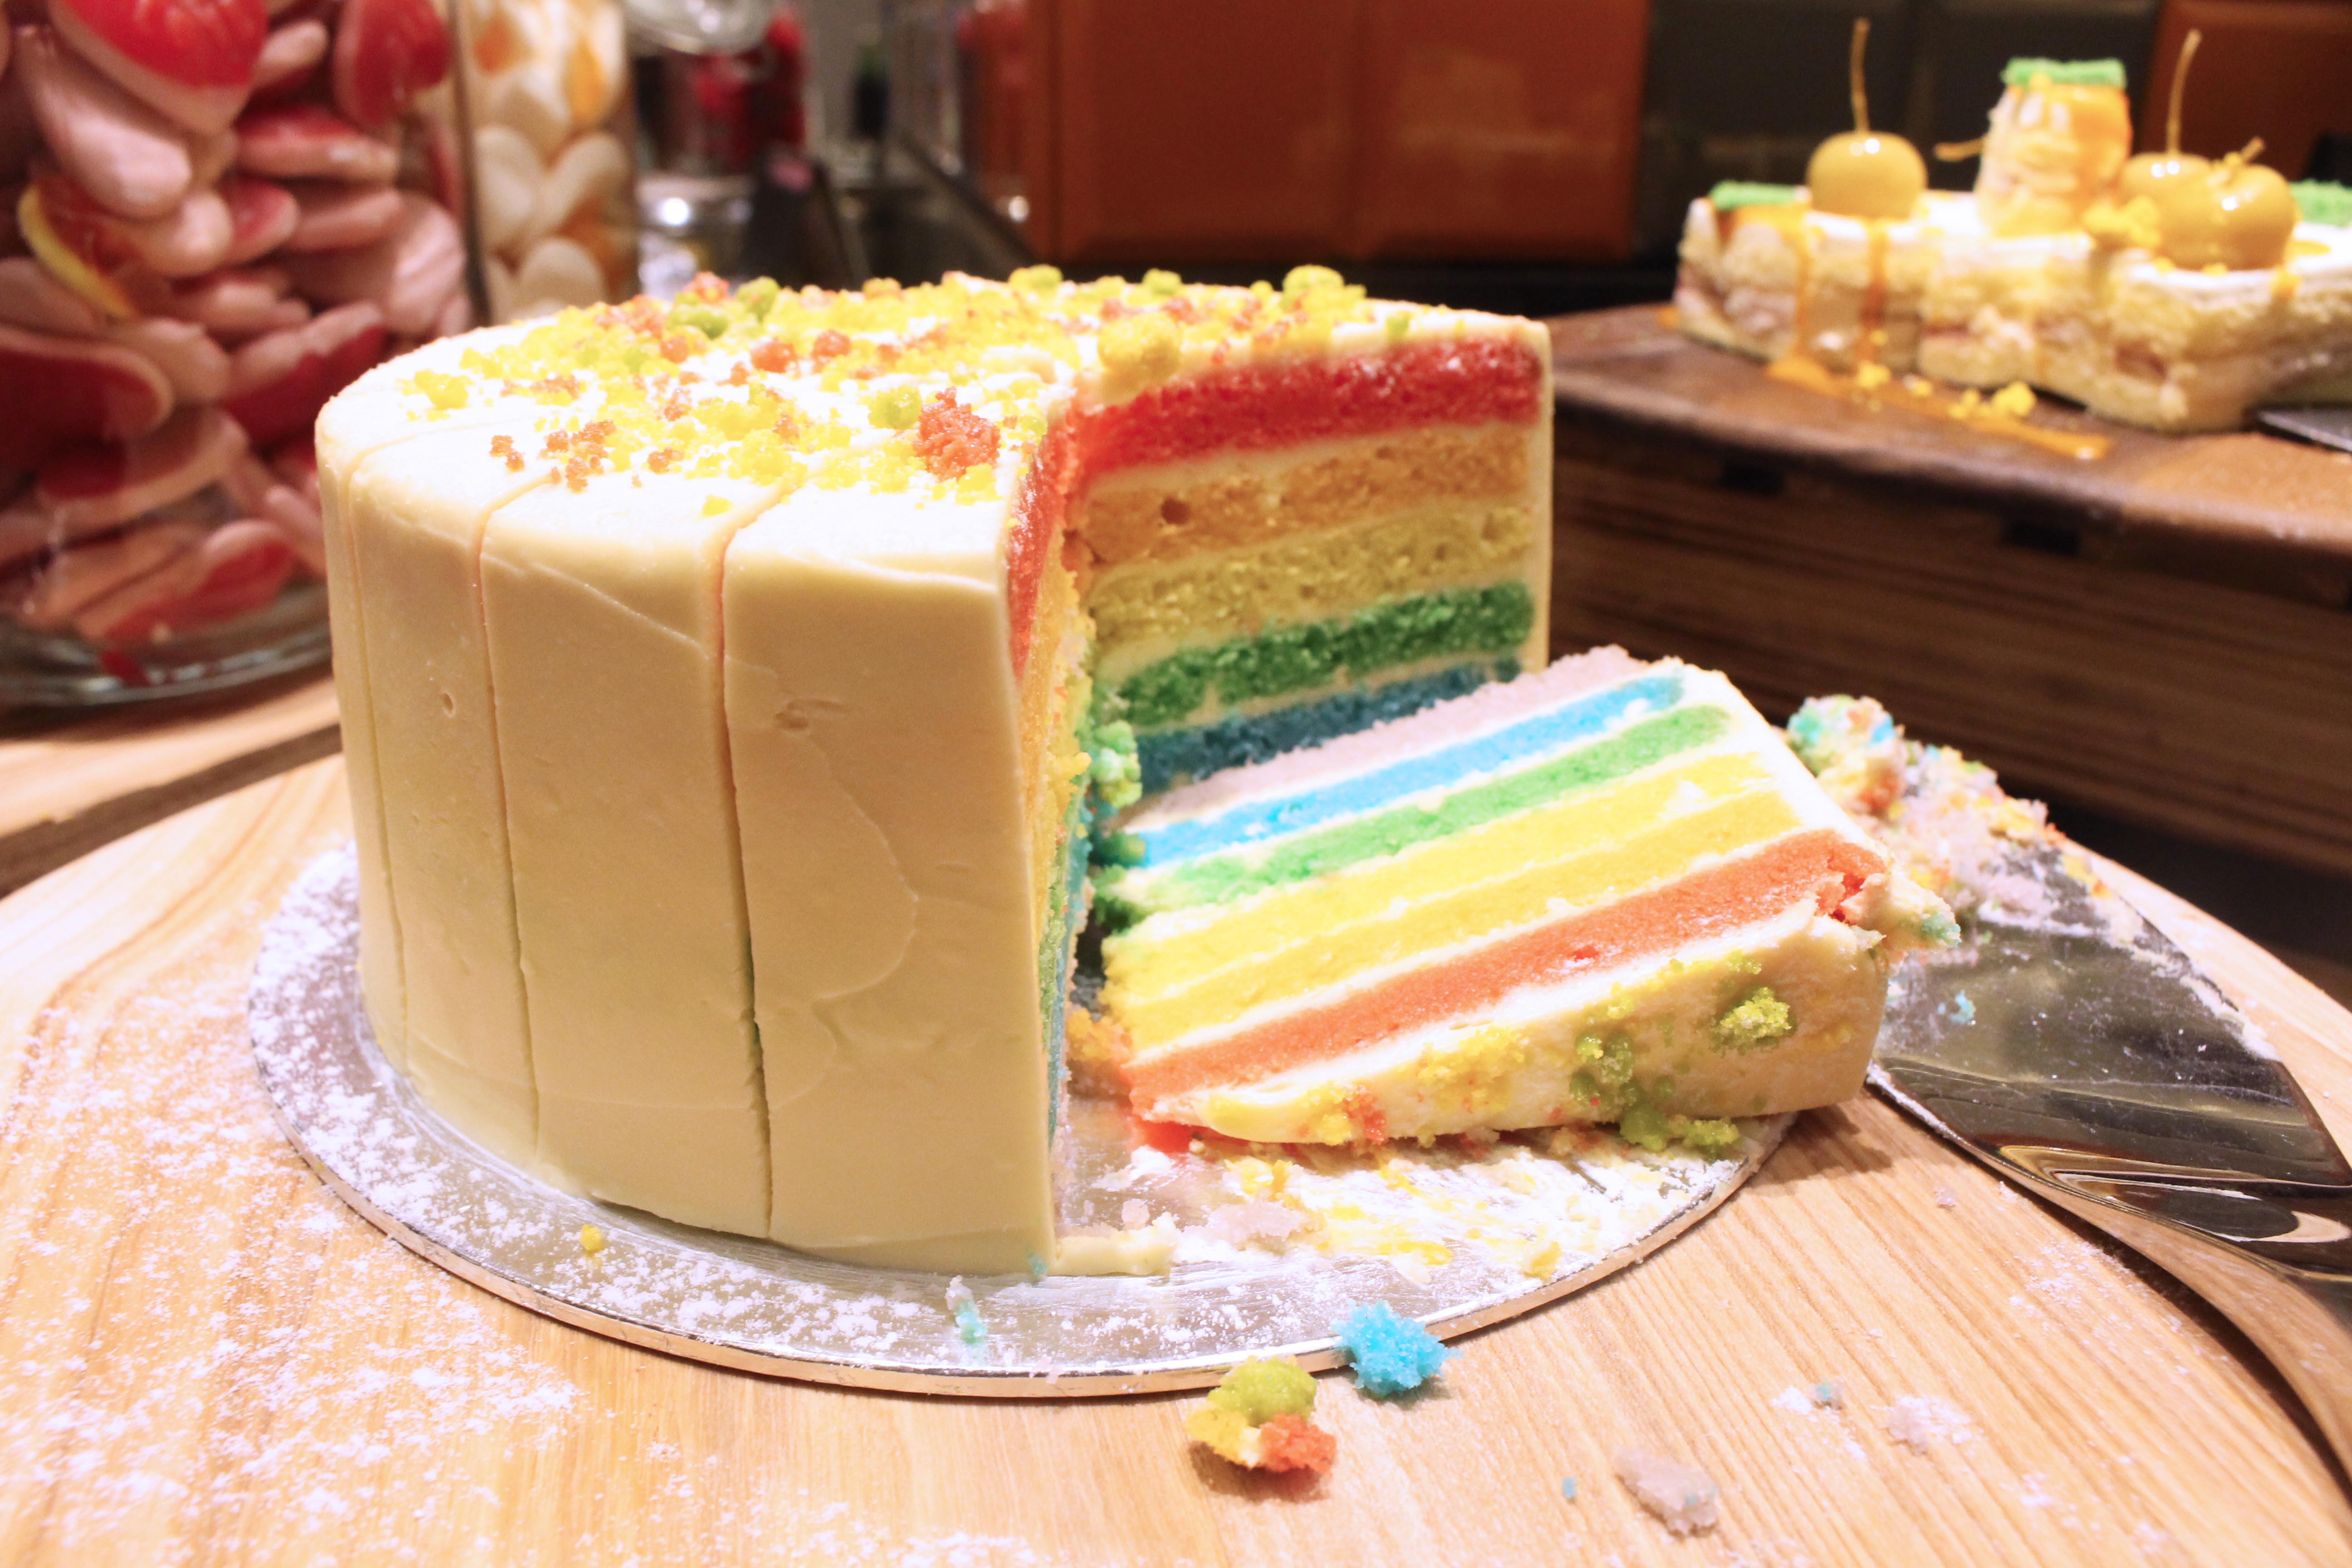 Rainbow cake being seen here, amongst the numerous dessert offerings of cakes like strawberry short cake, tiramisu, jelly treats and more.